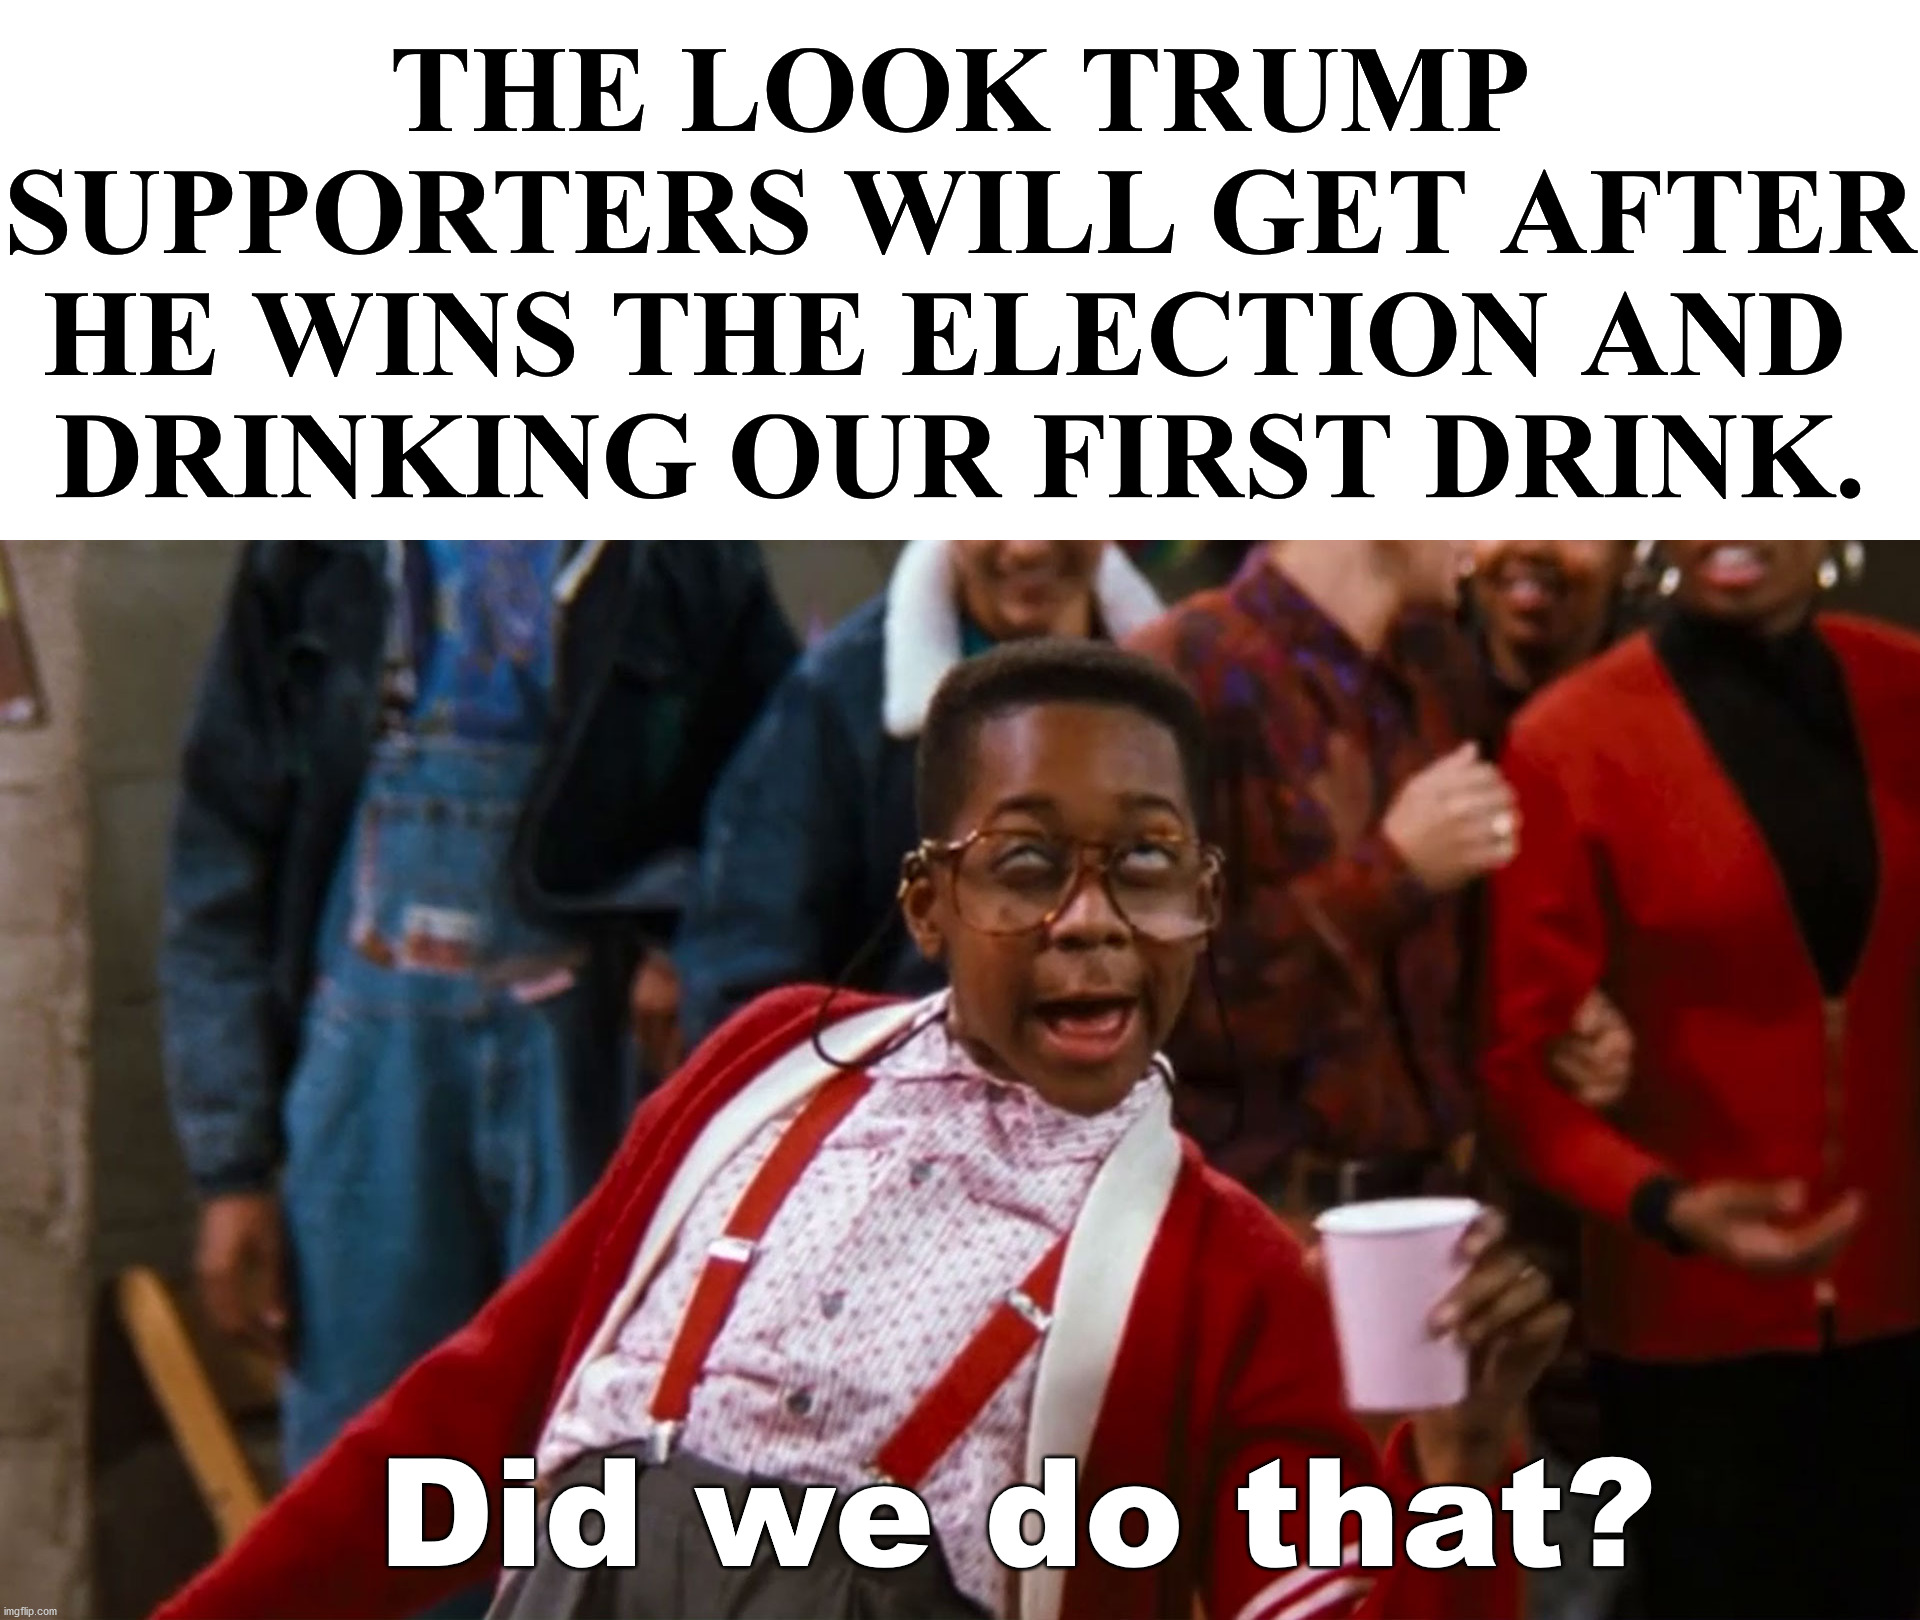 After all the lies and cheating, we will need a drink. | THE LOOK TRUMP SUPPORTERS WILL GET AFTER HE WINS THE ELECTION AND 
DRINKING OUR FIRST DRINK. Did we do that? | image tagged in steve urkel,political meme,election 2020,drinking | made w/ Imgflip meme maker